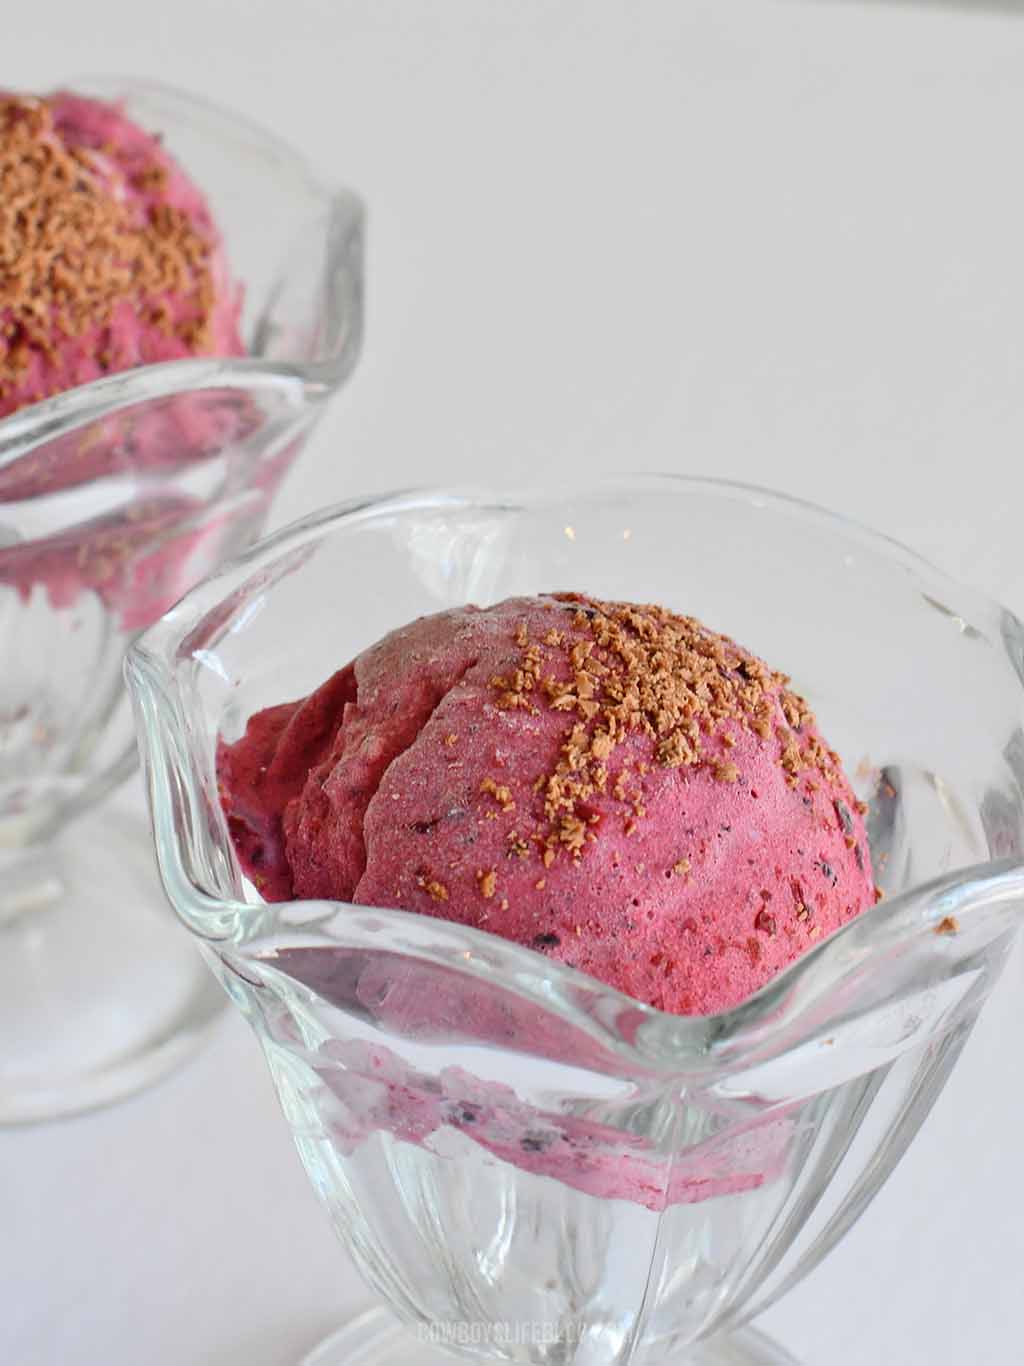 Mixed berry ice cream topping with chocolate shavings in a glass bowl